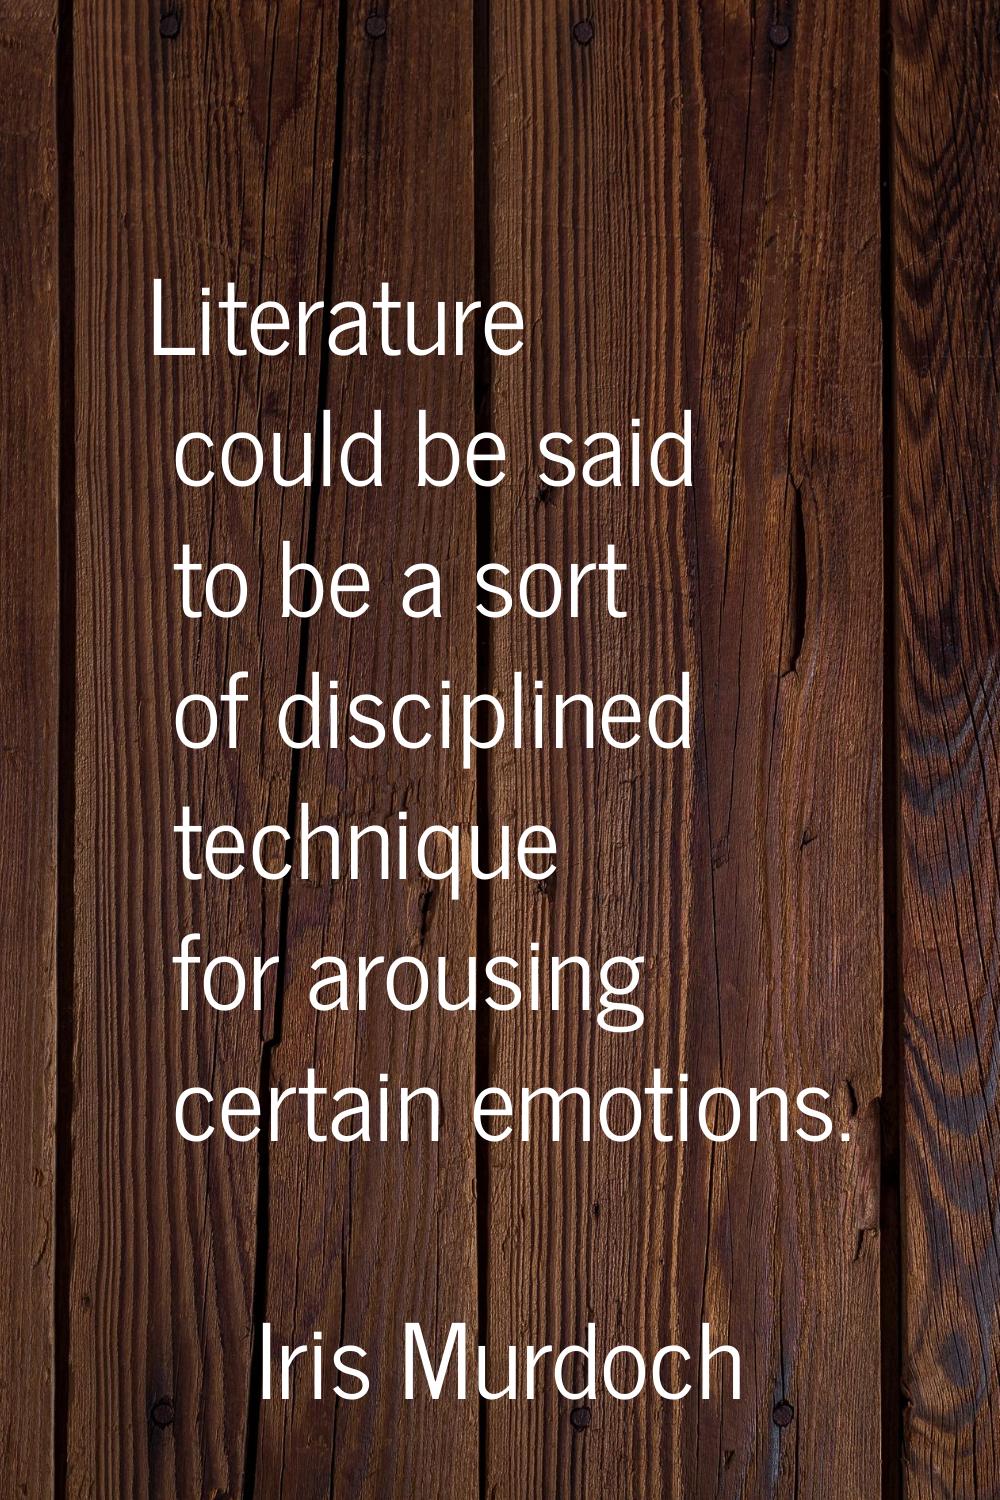 Literature could be said to be a sort of disciplined technique for arousing certain emotions.